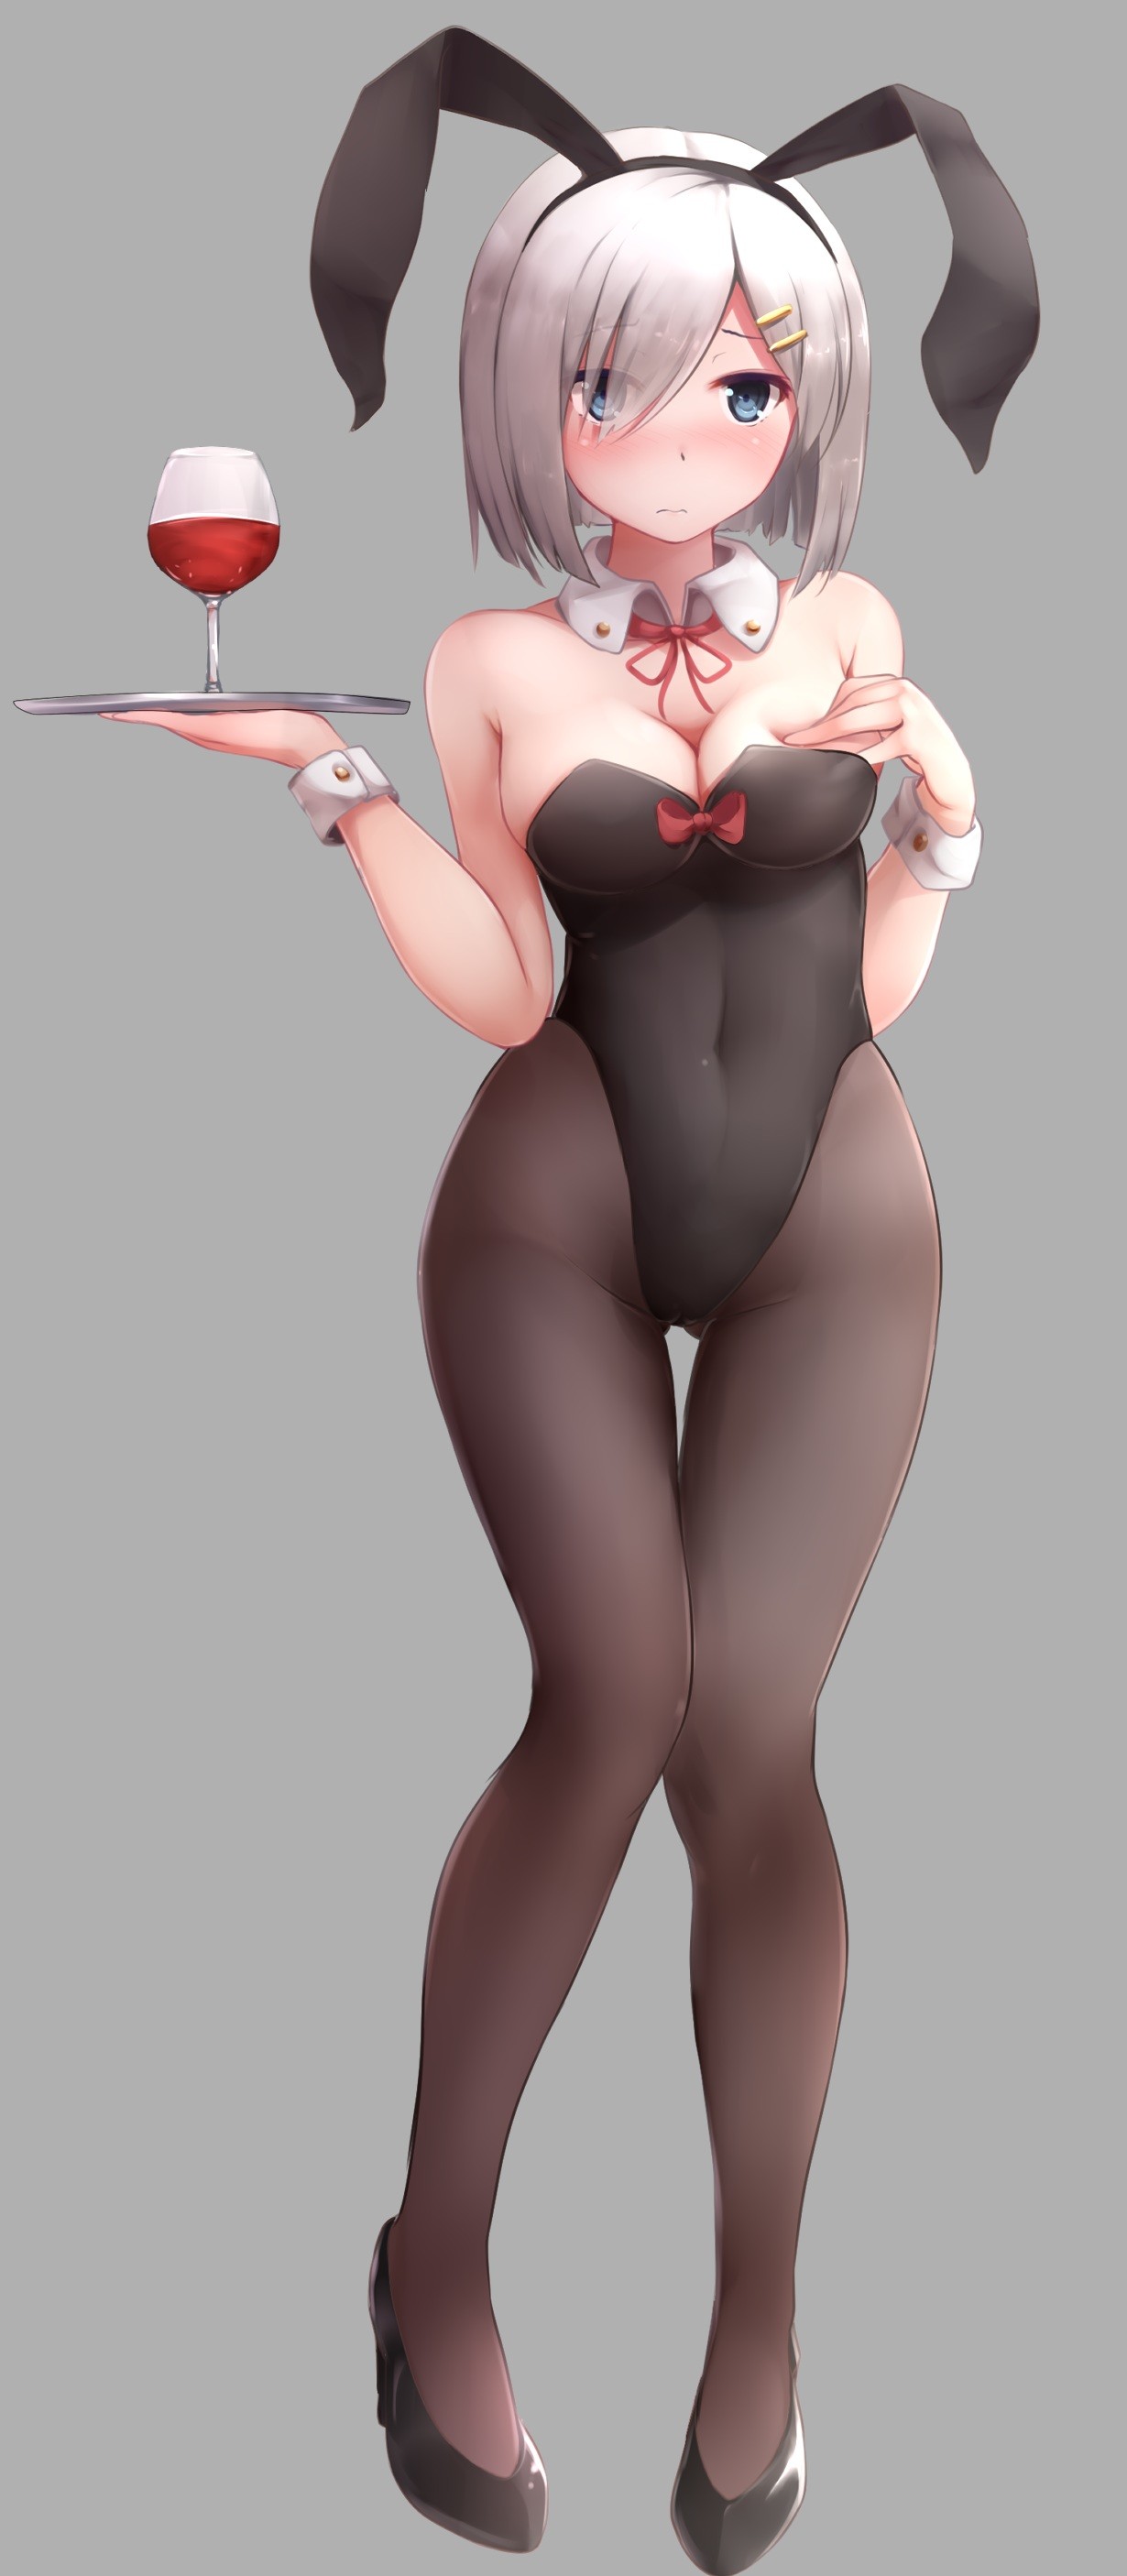 Anime 1230x2812 anime anime girls Kantai Collection Hamakaze (KanColle)  animal ears bunny ears bunny girl cameltoe cleavage heels short hair gray hair blue eyes bunny suit pantyhose squeezing breast thighs together